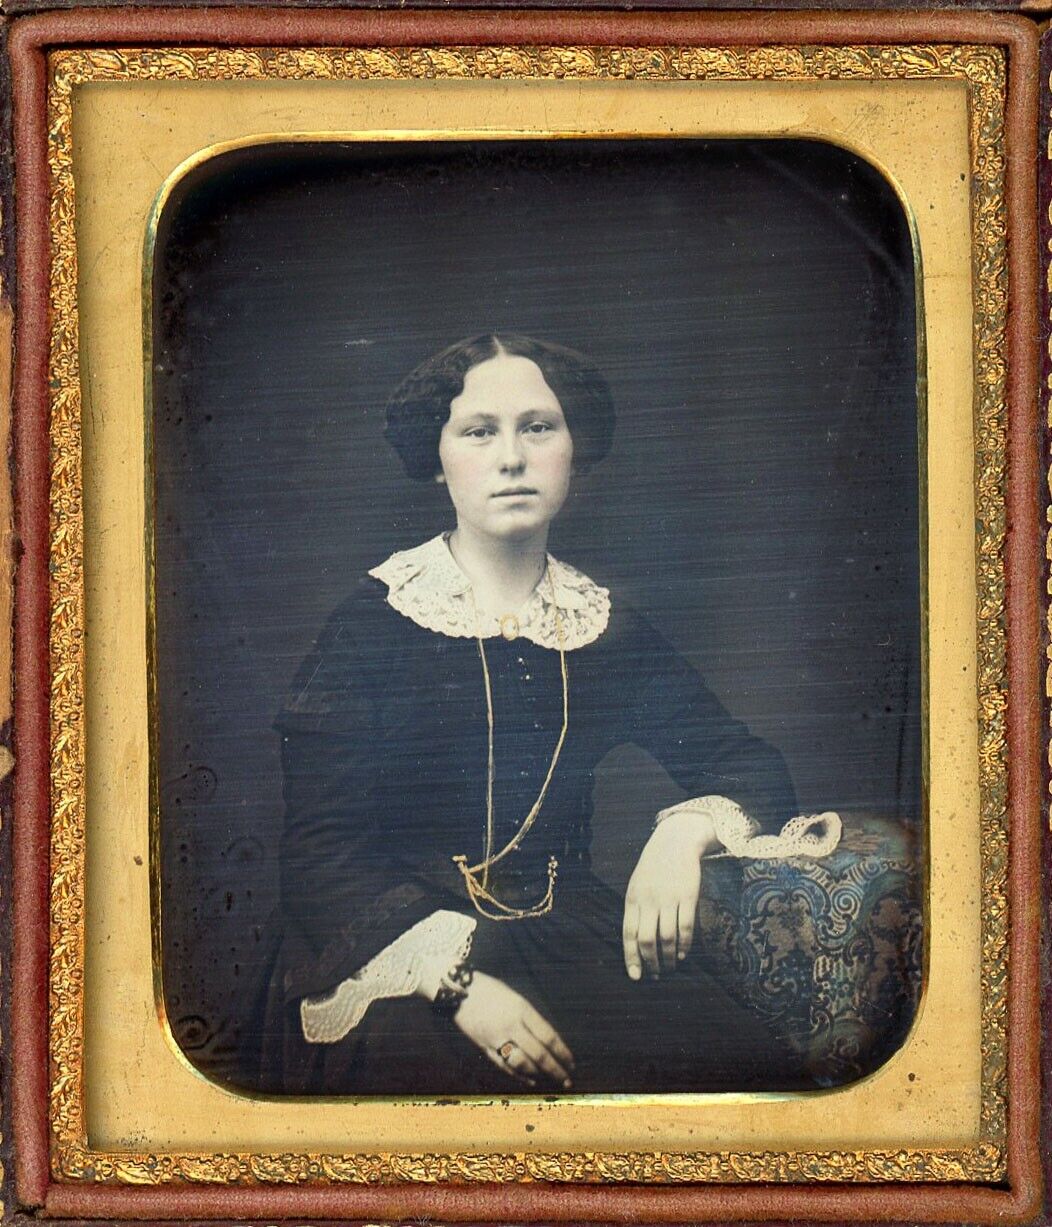 SUPER HIGH CONTRAST WOMAN WITH GOLD AND LACE LOVELY DEMEANOR DAGUERREOTYPE